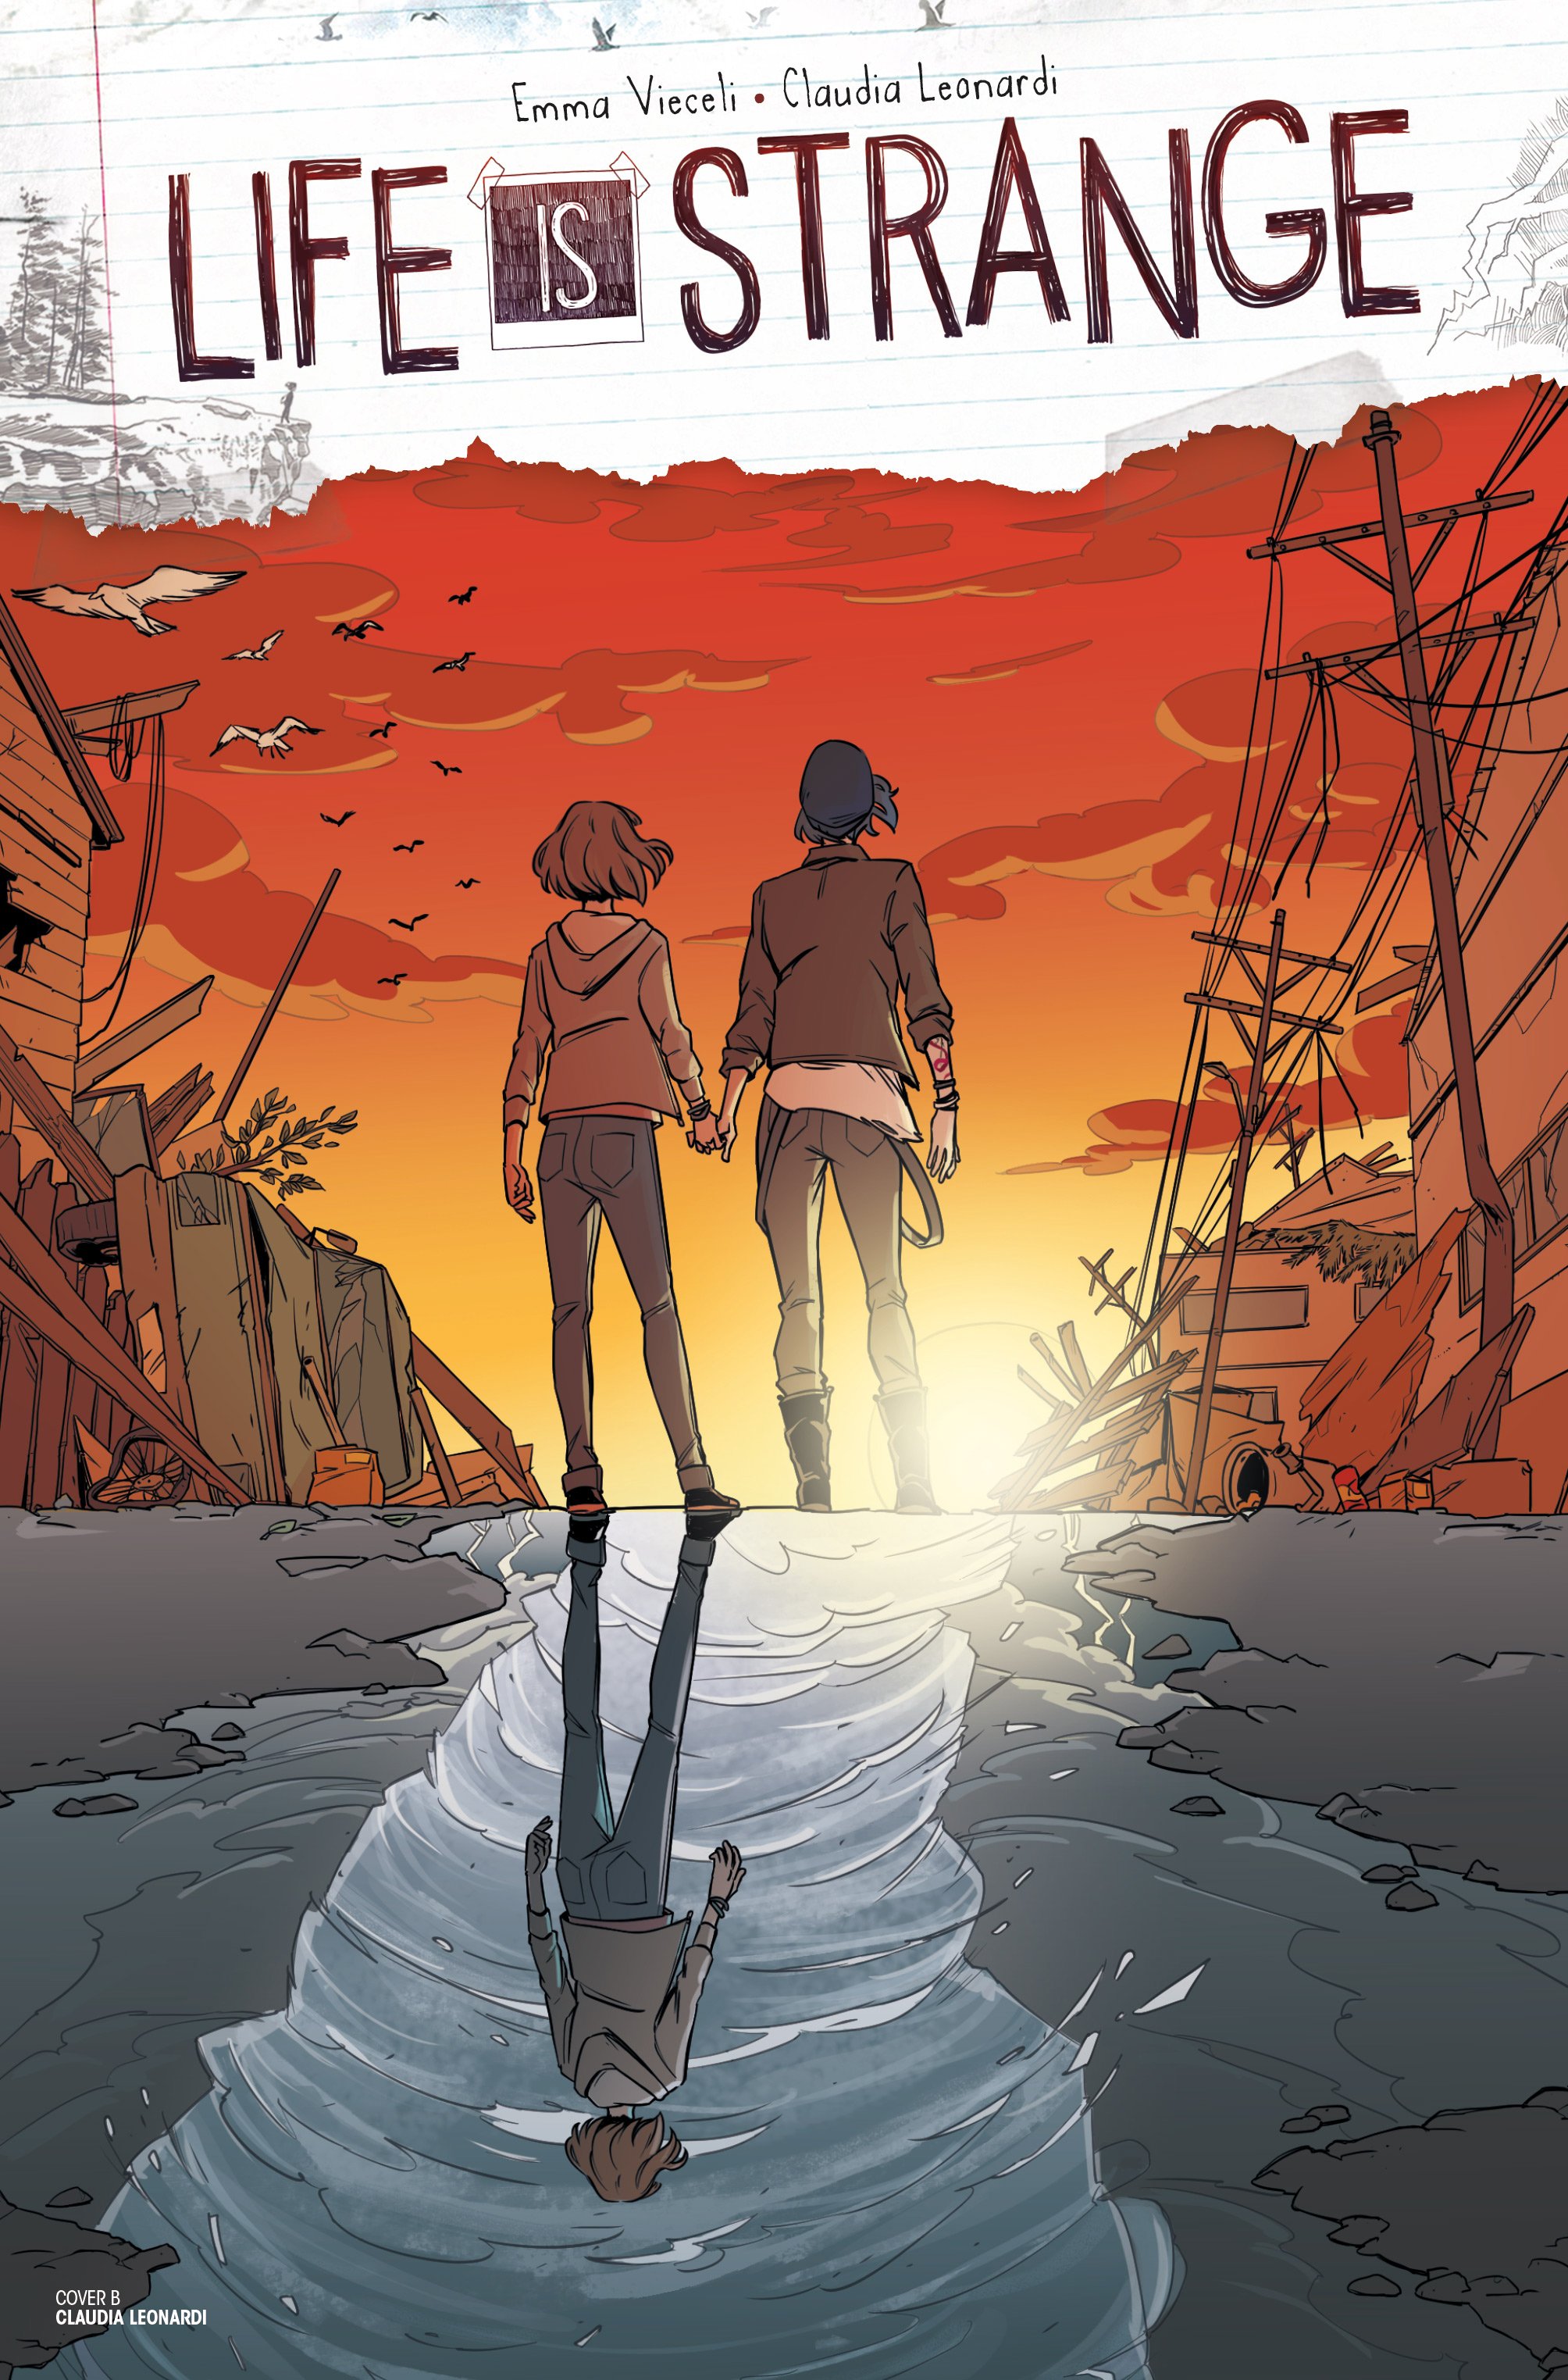 Life is Strange: Art and Game